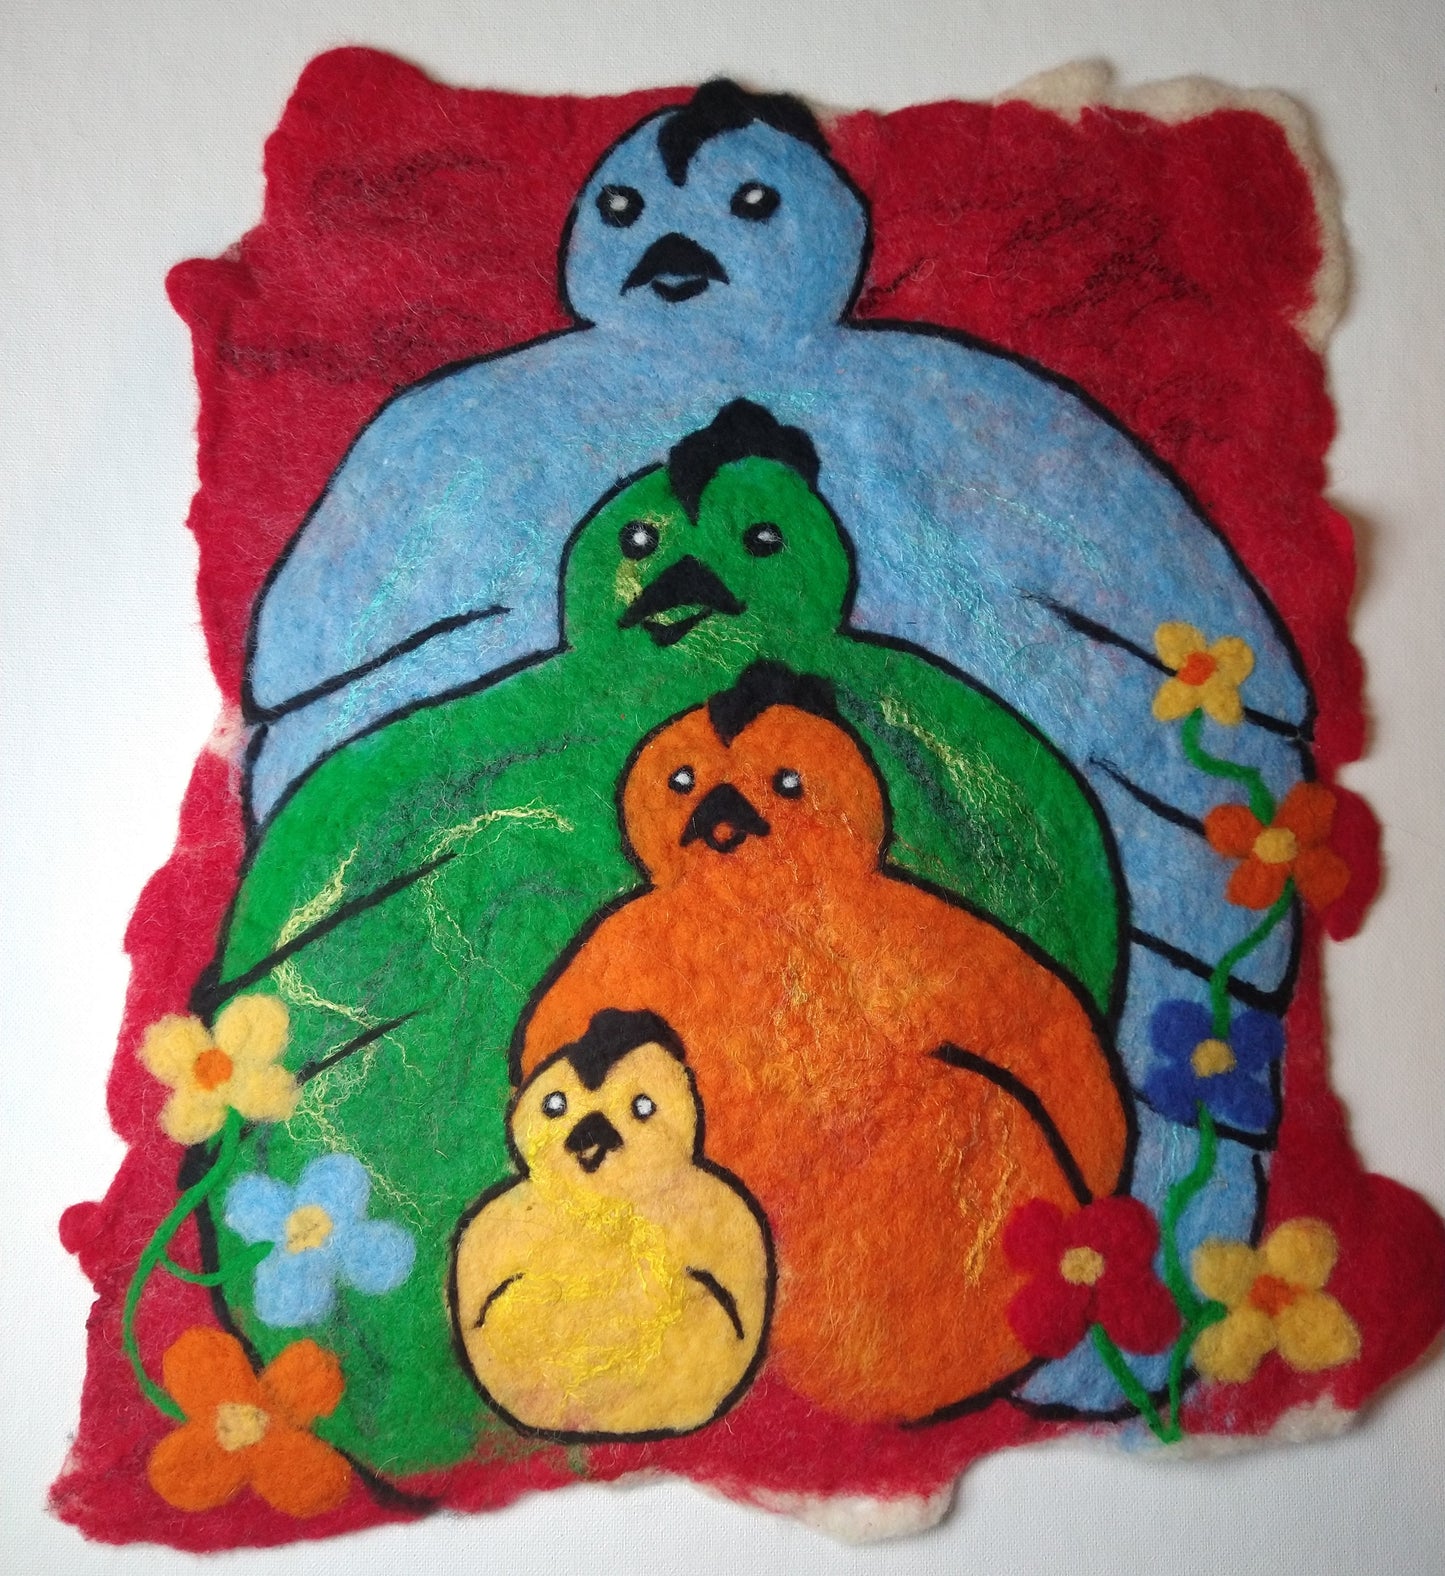 Felted wool wall hanging chicken wall art colorful living room wall hanging